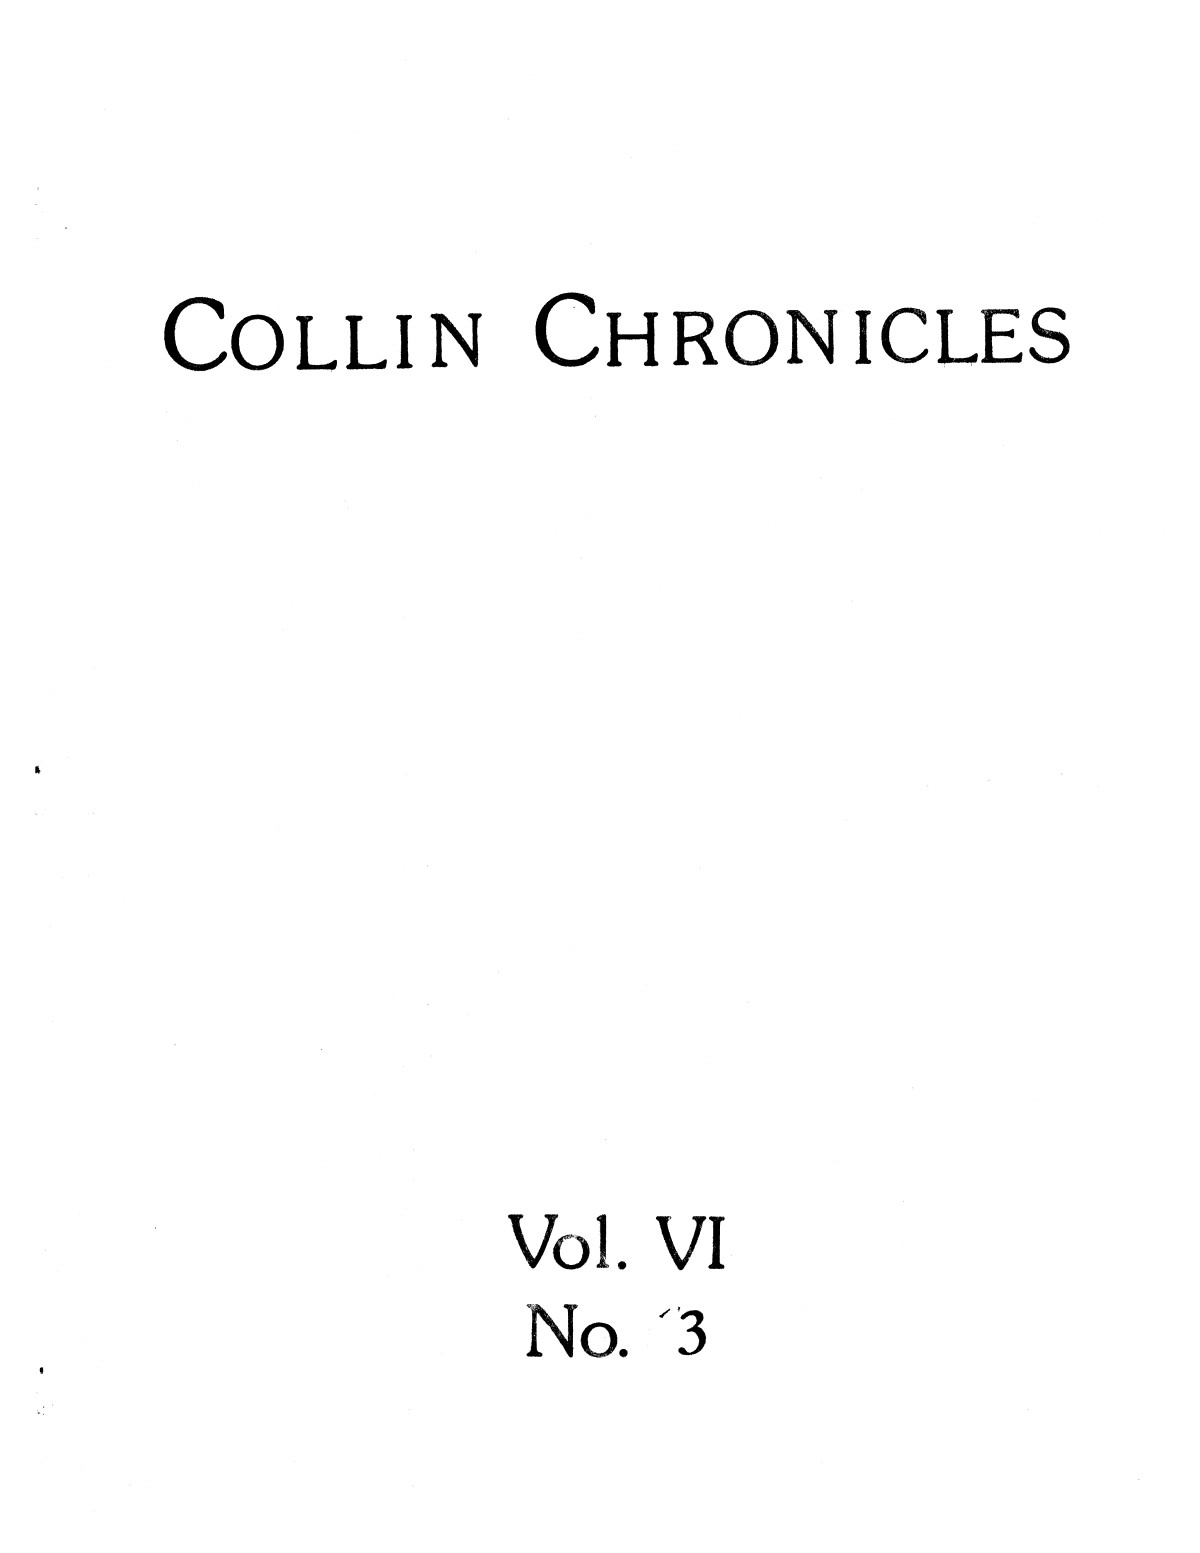 Collin Chronicles, Volume 6, Number 3, March 1985
                                                
                                                    [Sequence #]: 1 of 28
                                                